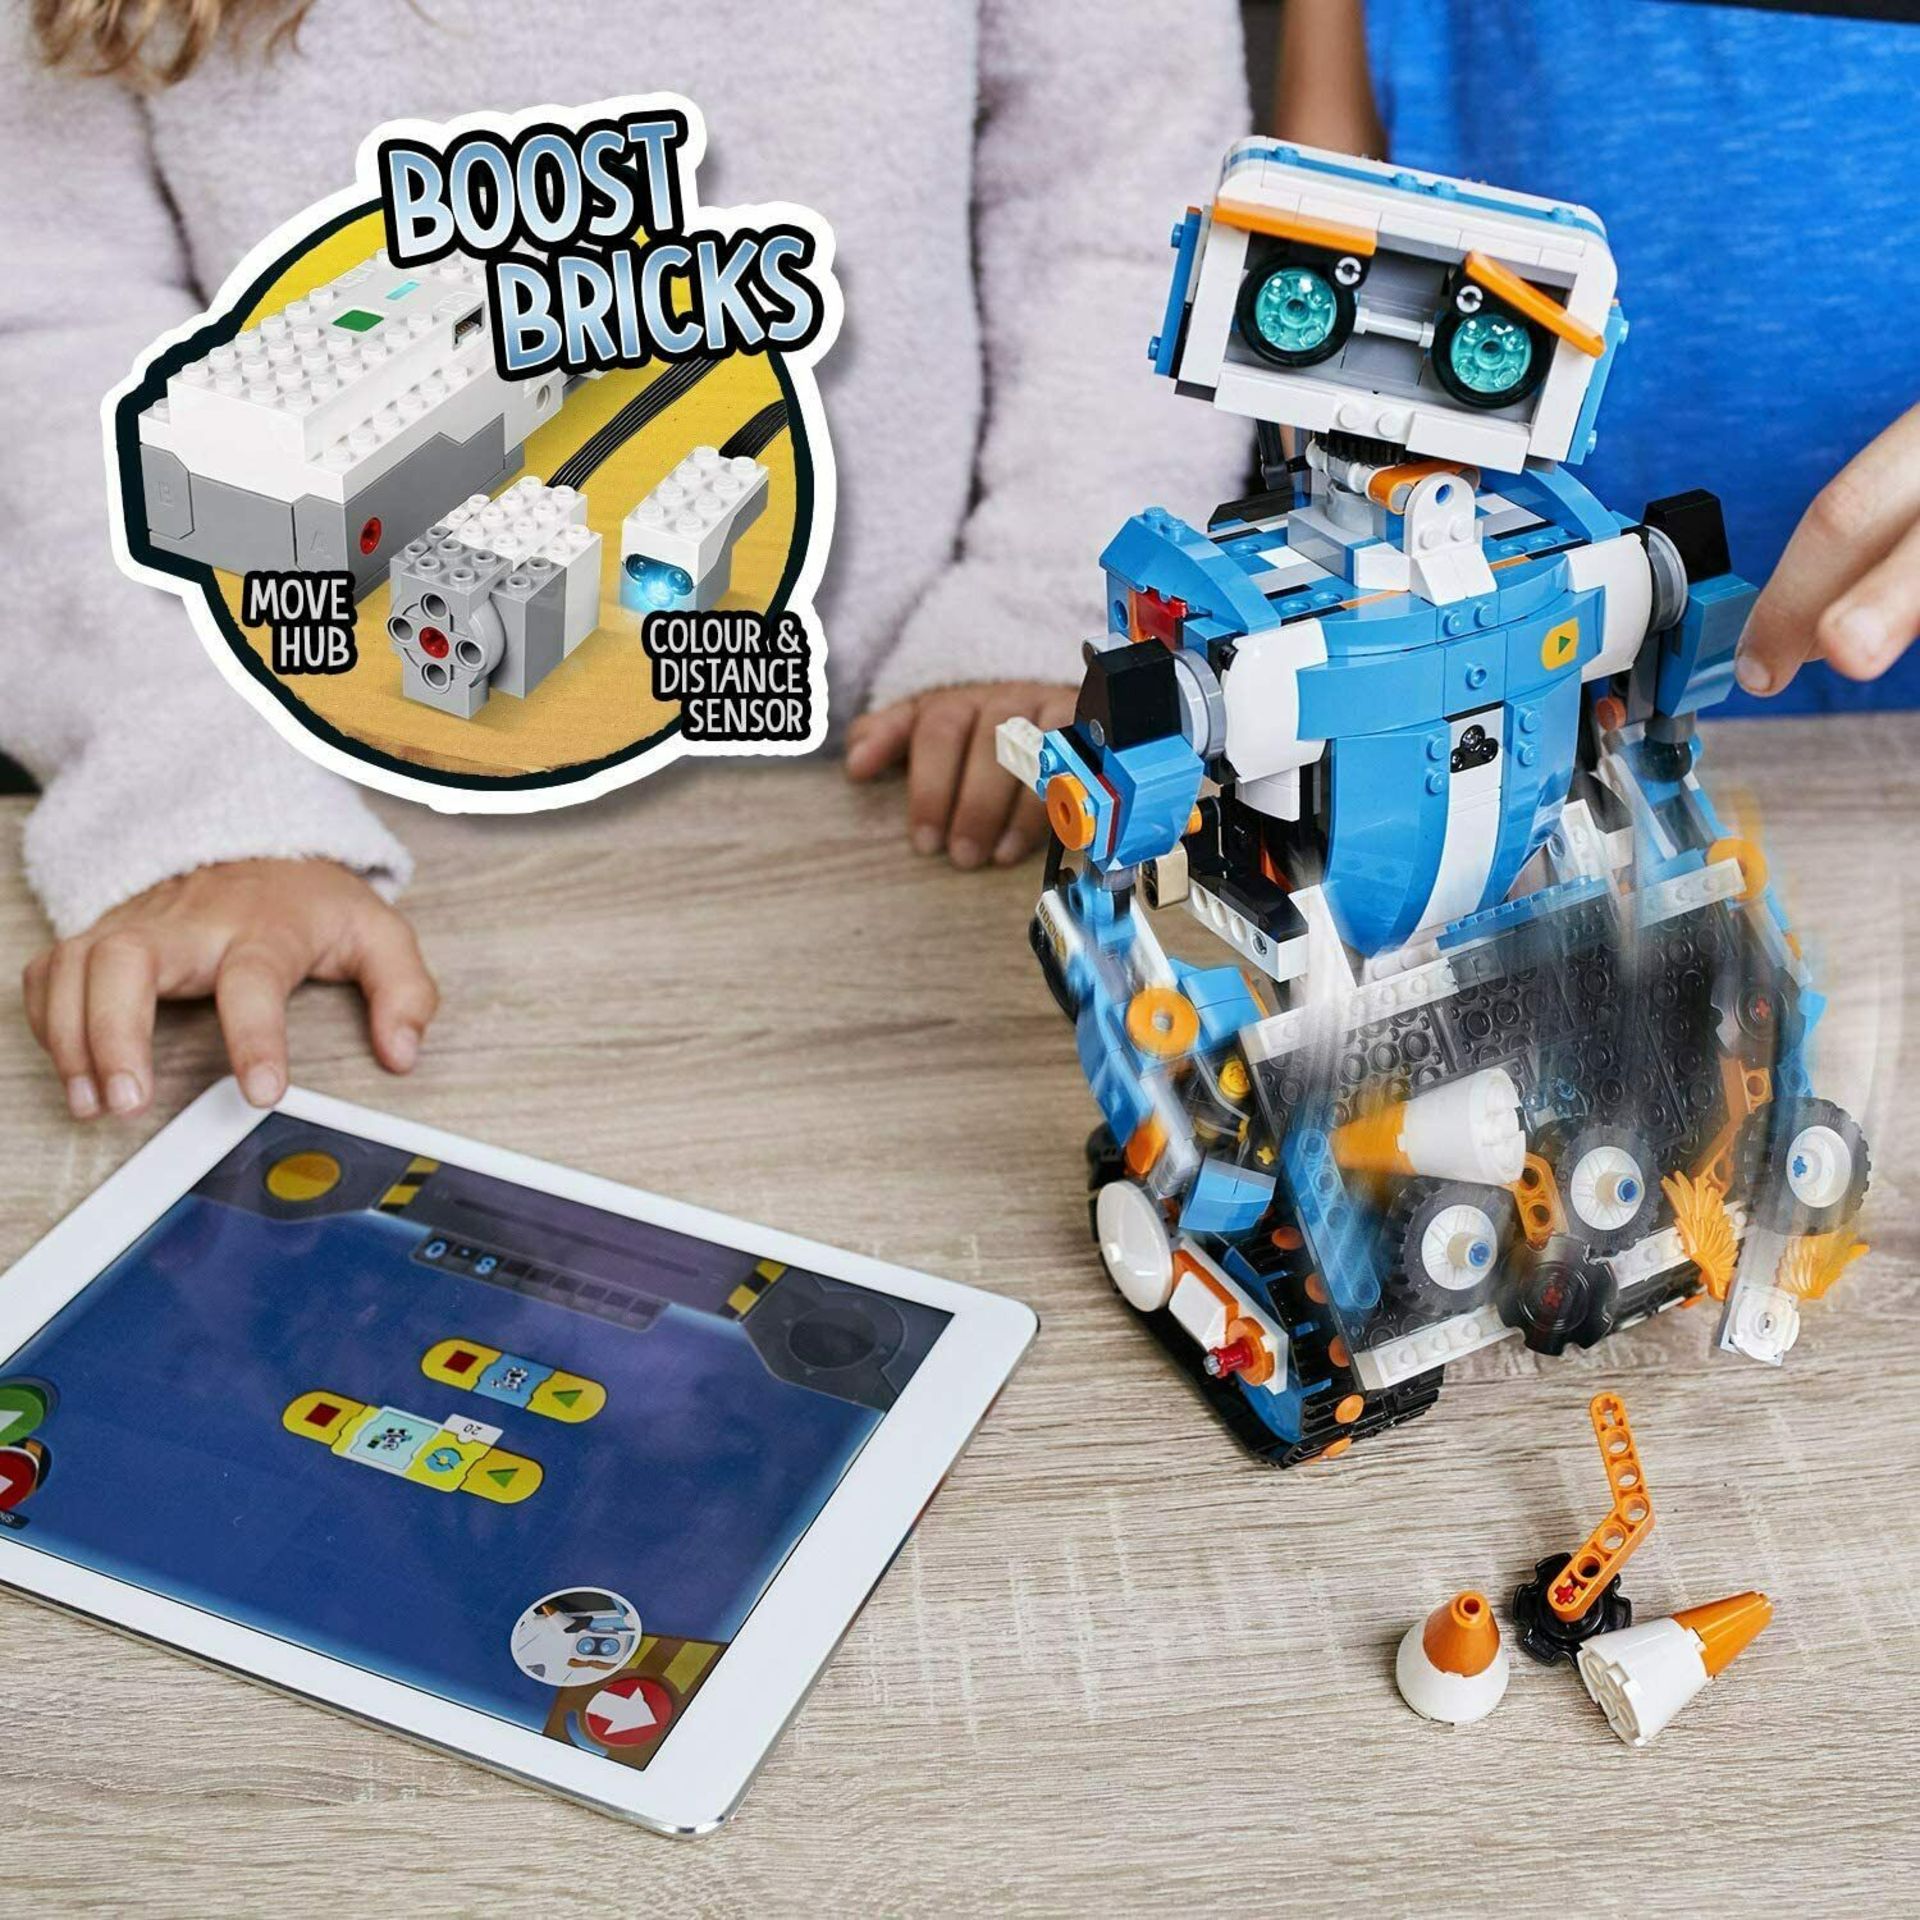 1 x Lego Boost 17101 Creative Toolbox - Build, Code and Play - 5 in 1 Robotics Lego Kit - Unused and - Image 2 of 6